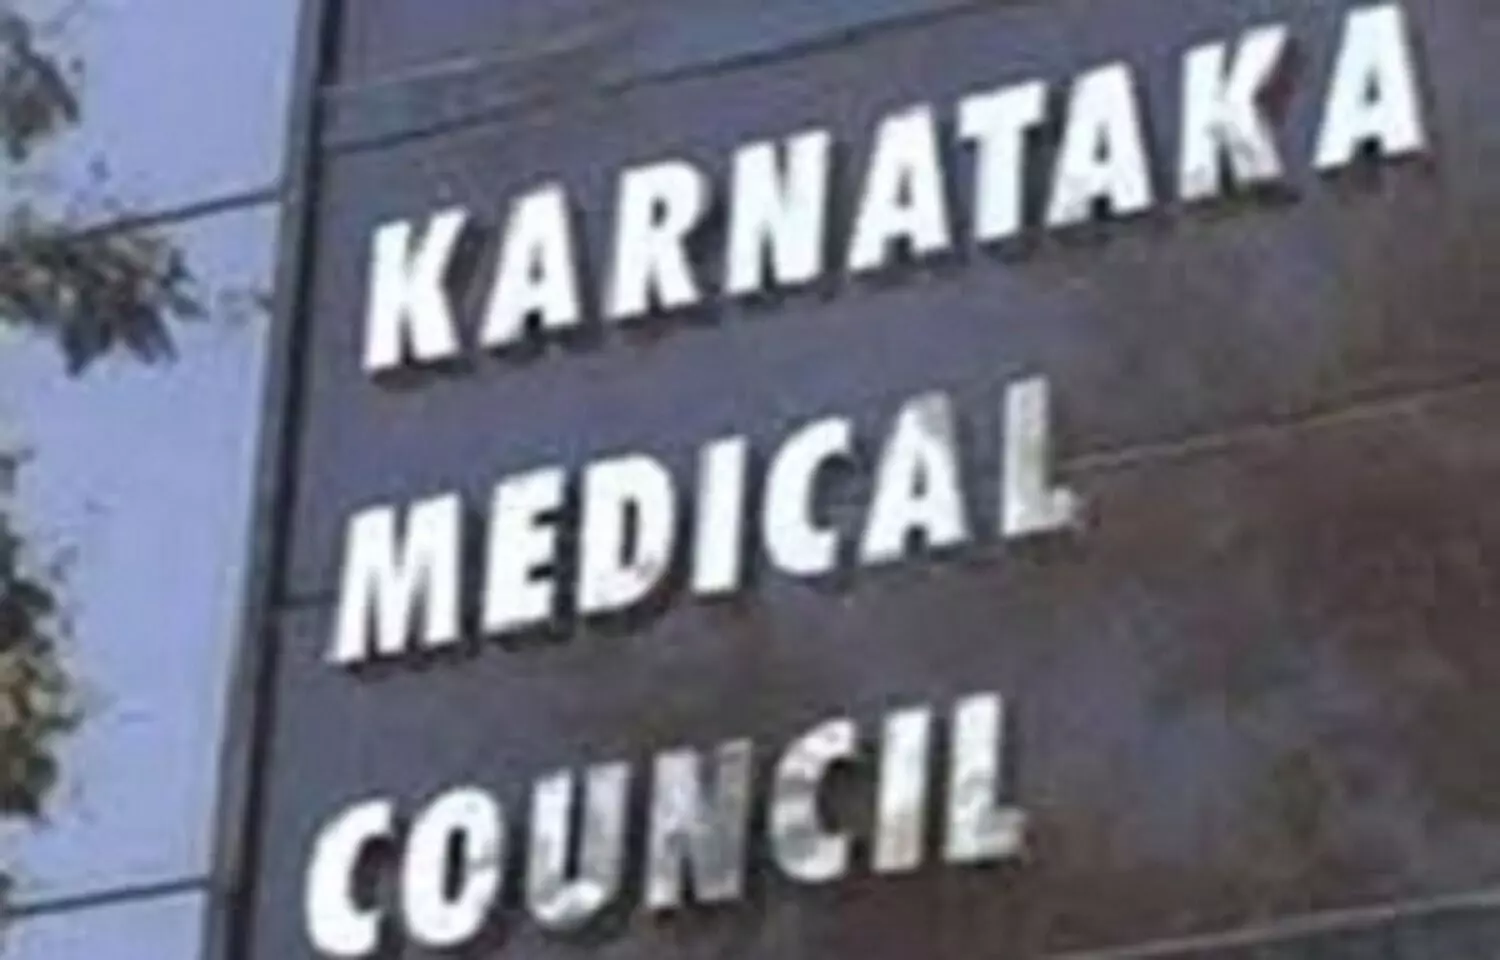 KMC Election Results Still Pending: 153 Medical Negligence Complaints unsettled